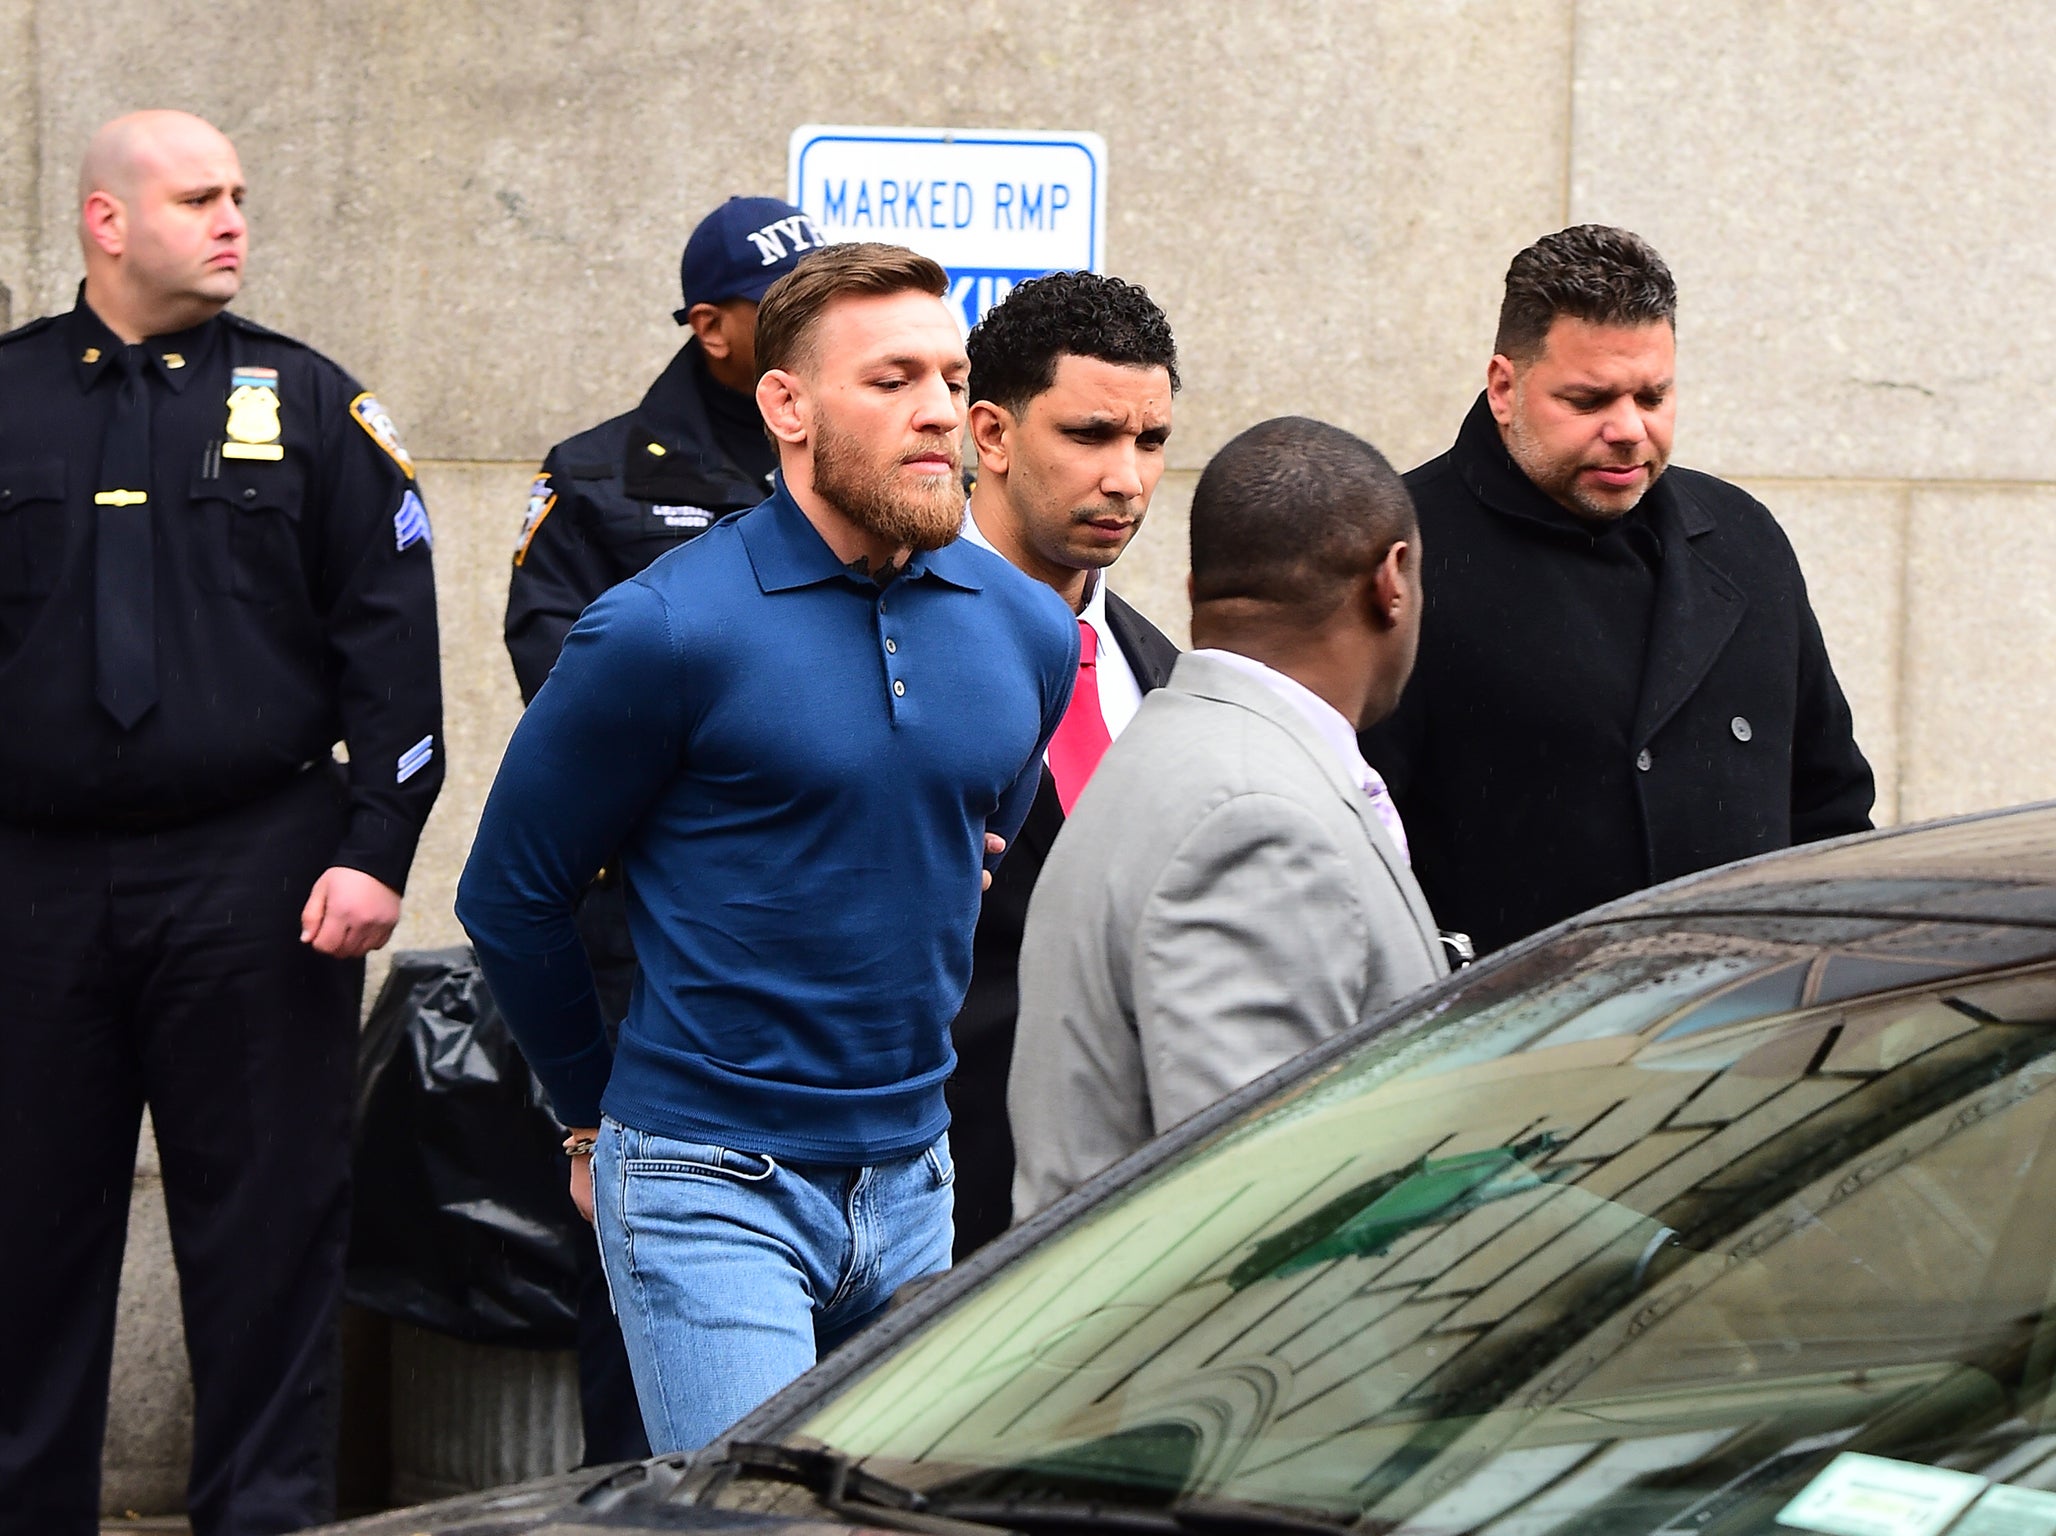 Conor McGregor handed himself in to police on Thursday